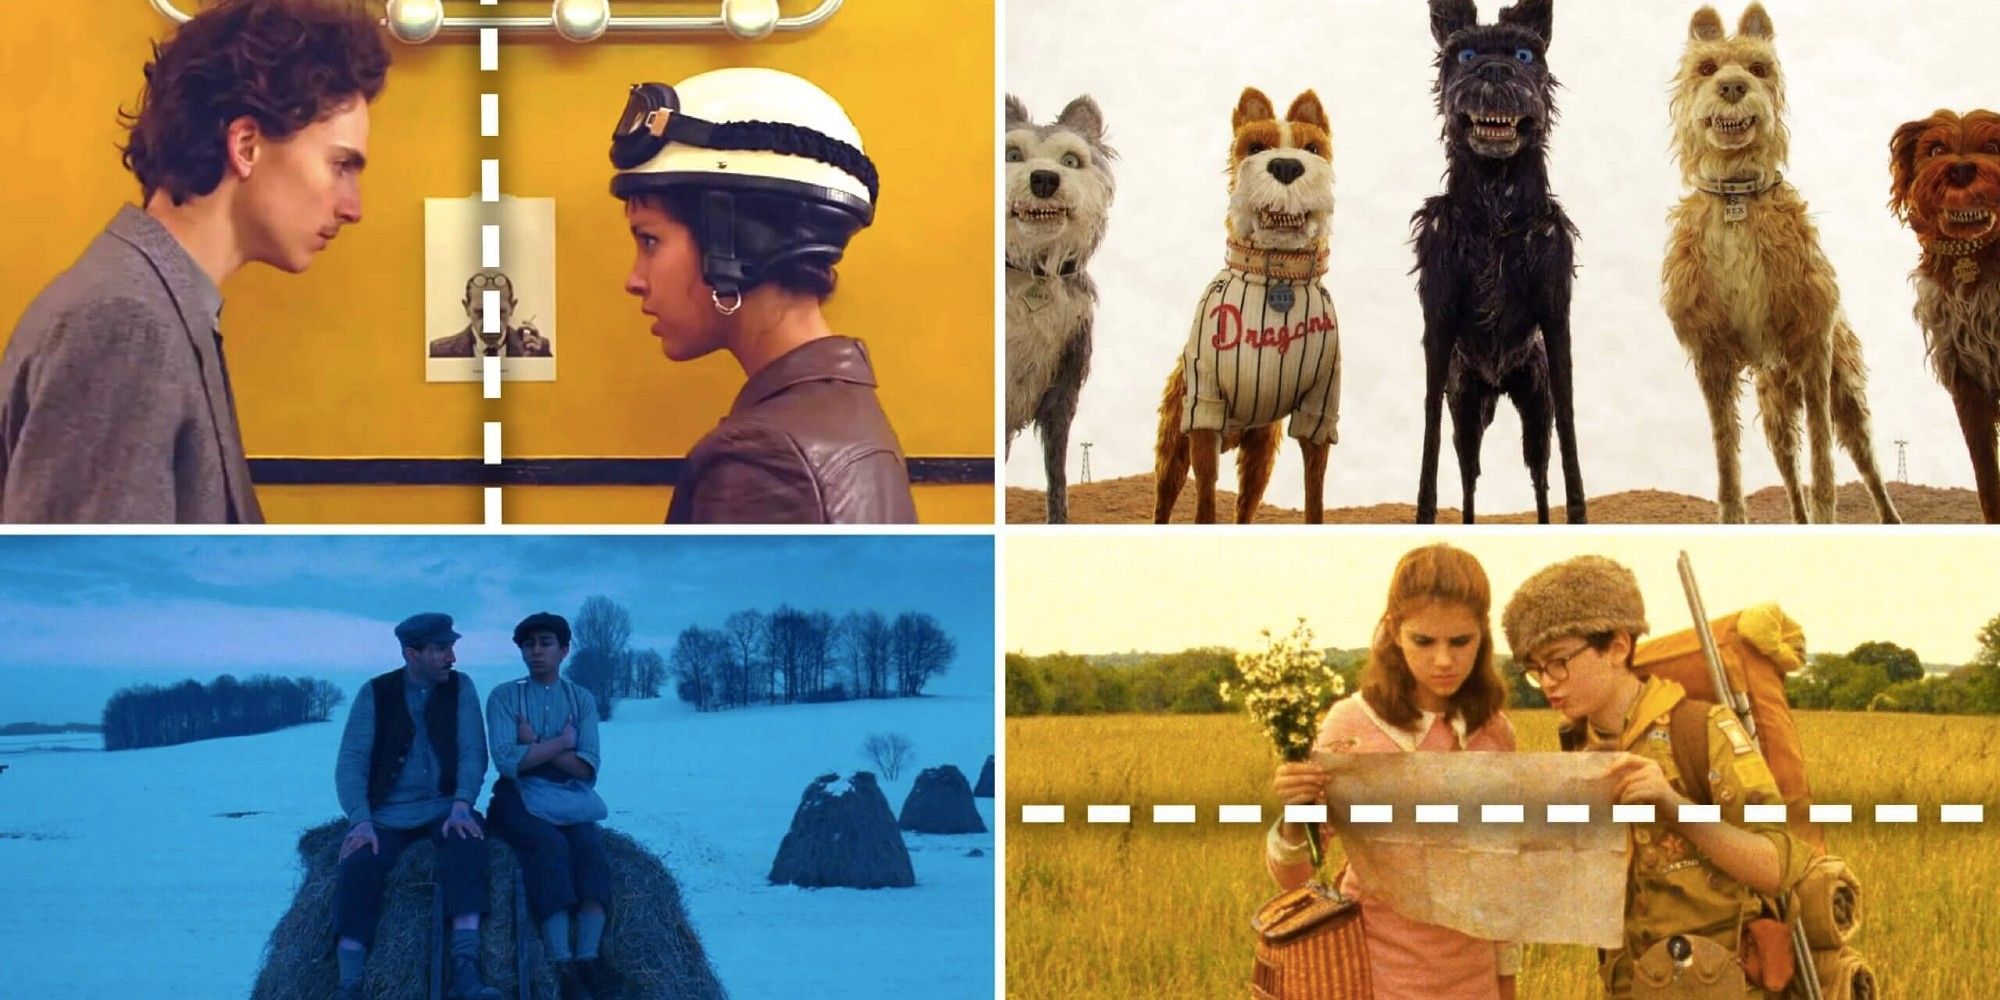 Examples of Symmetry in Wes Anderson Films